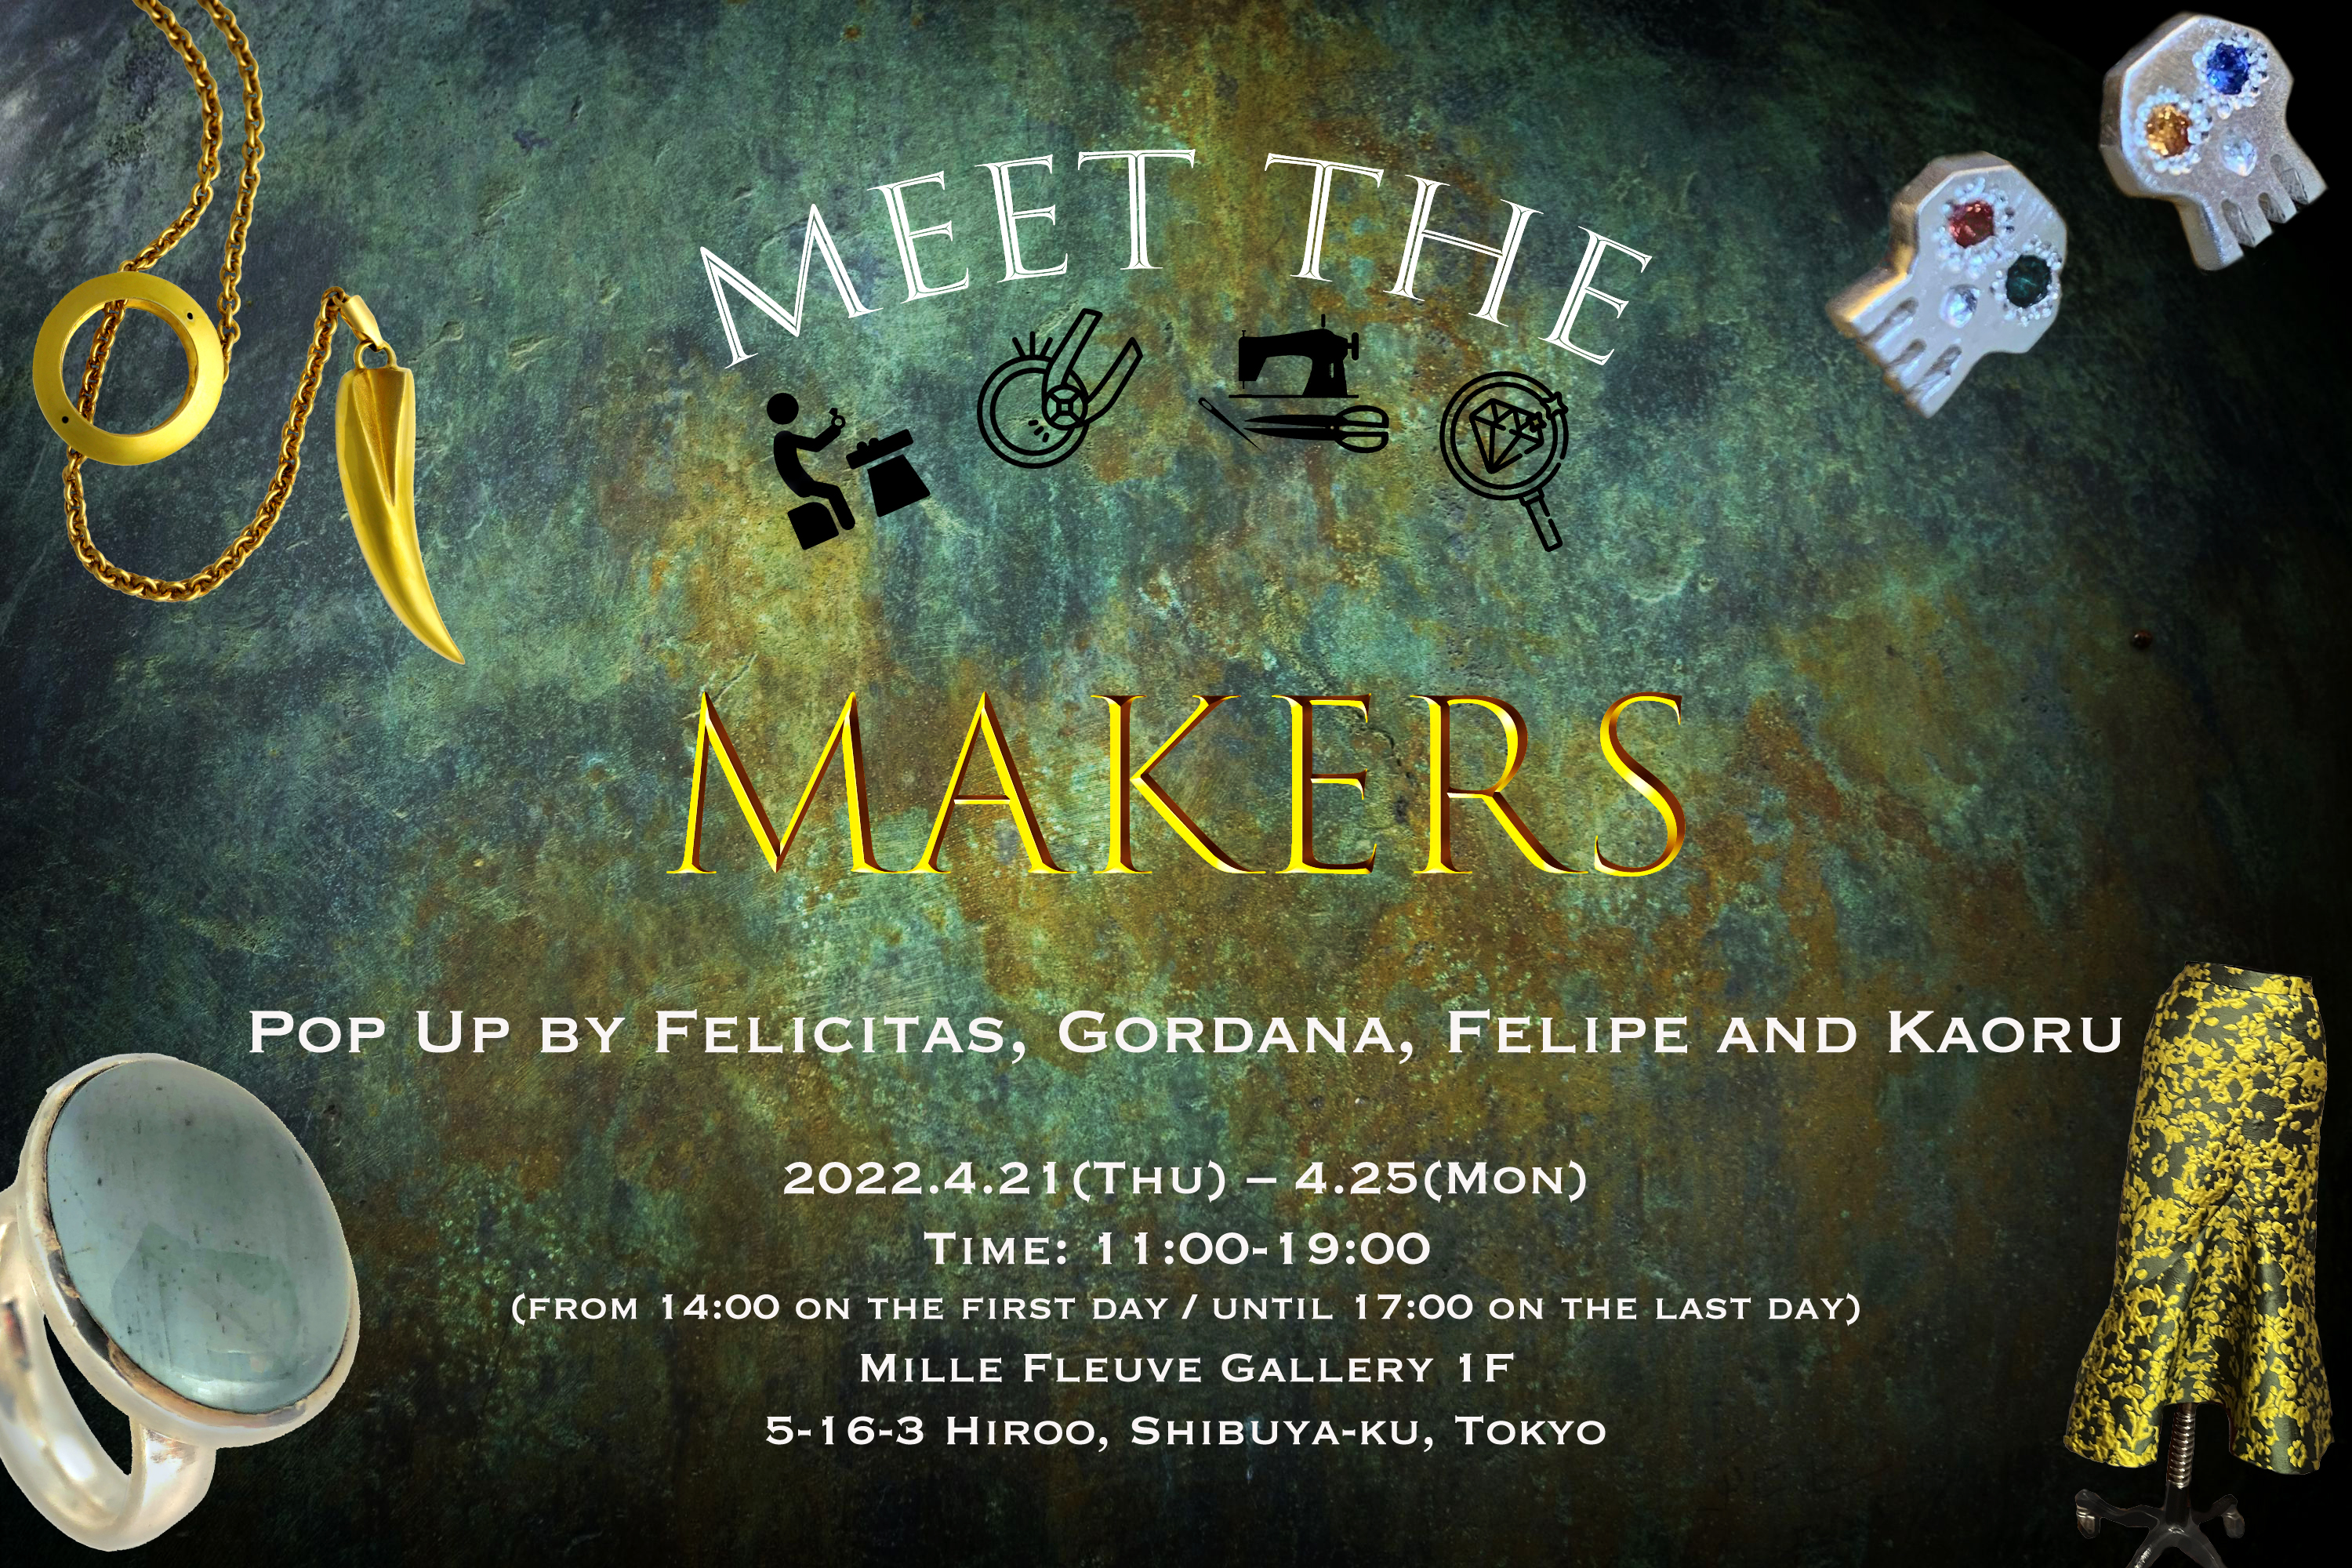 MEET THE MAKERS